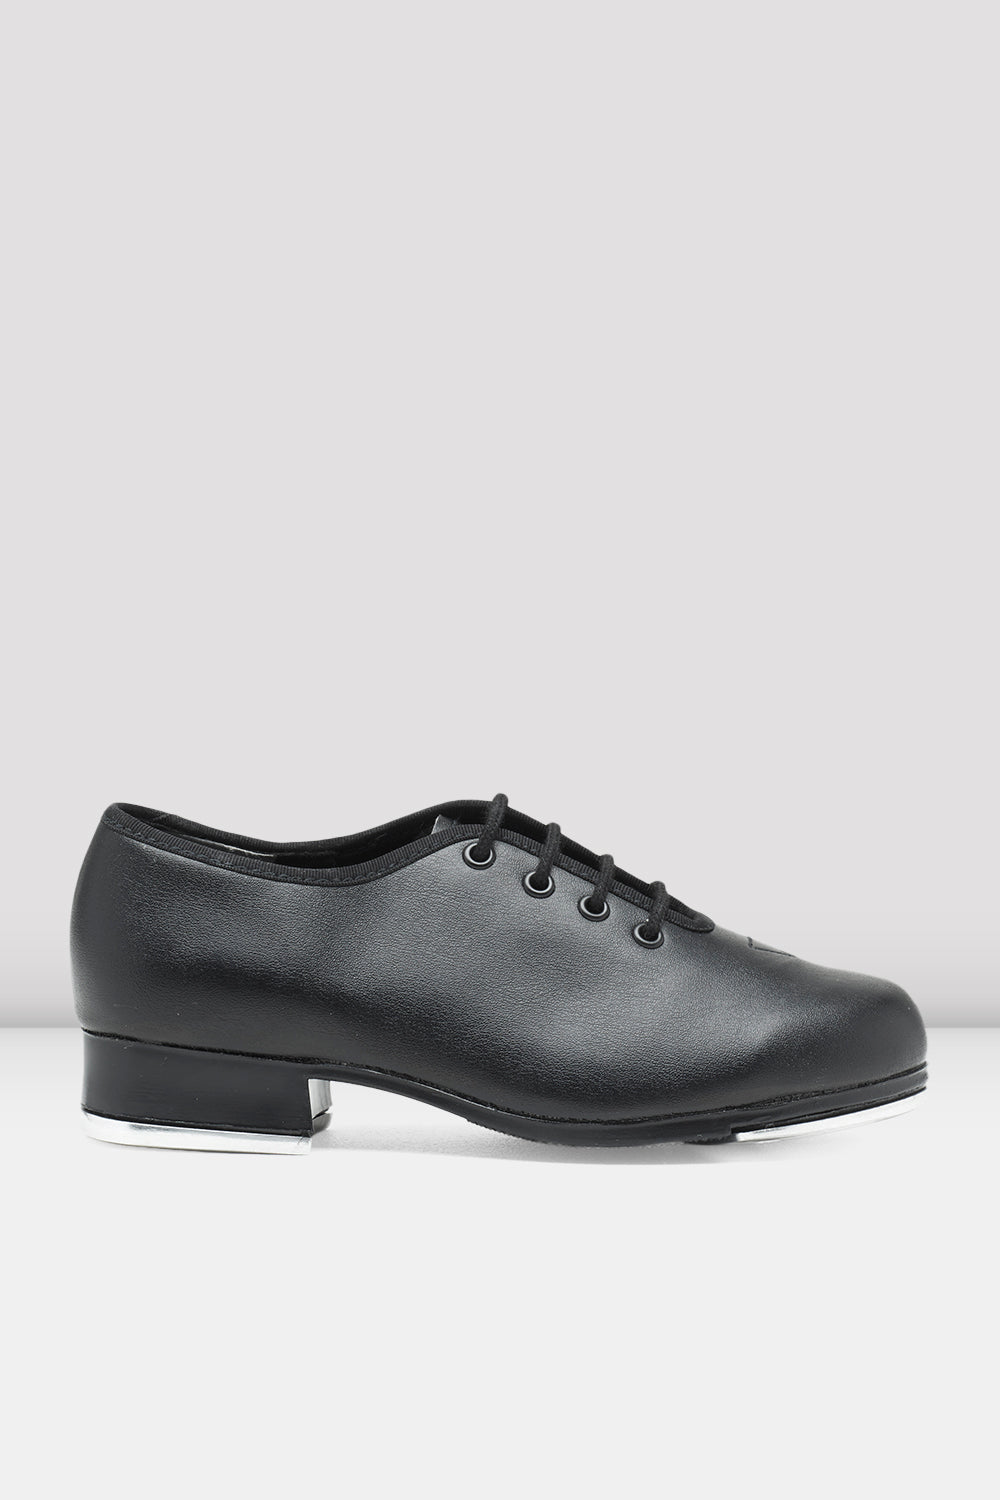 BLOCH Ladies Economy Jazz Tap Shoes, Black Synthetic Leather